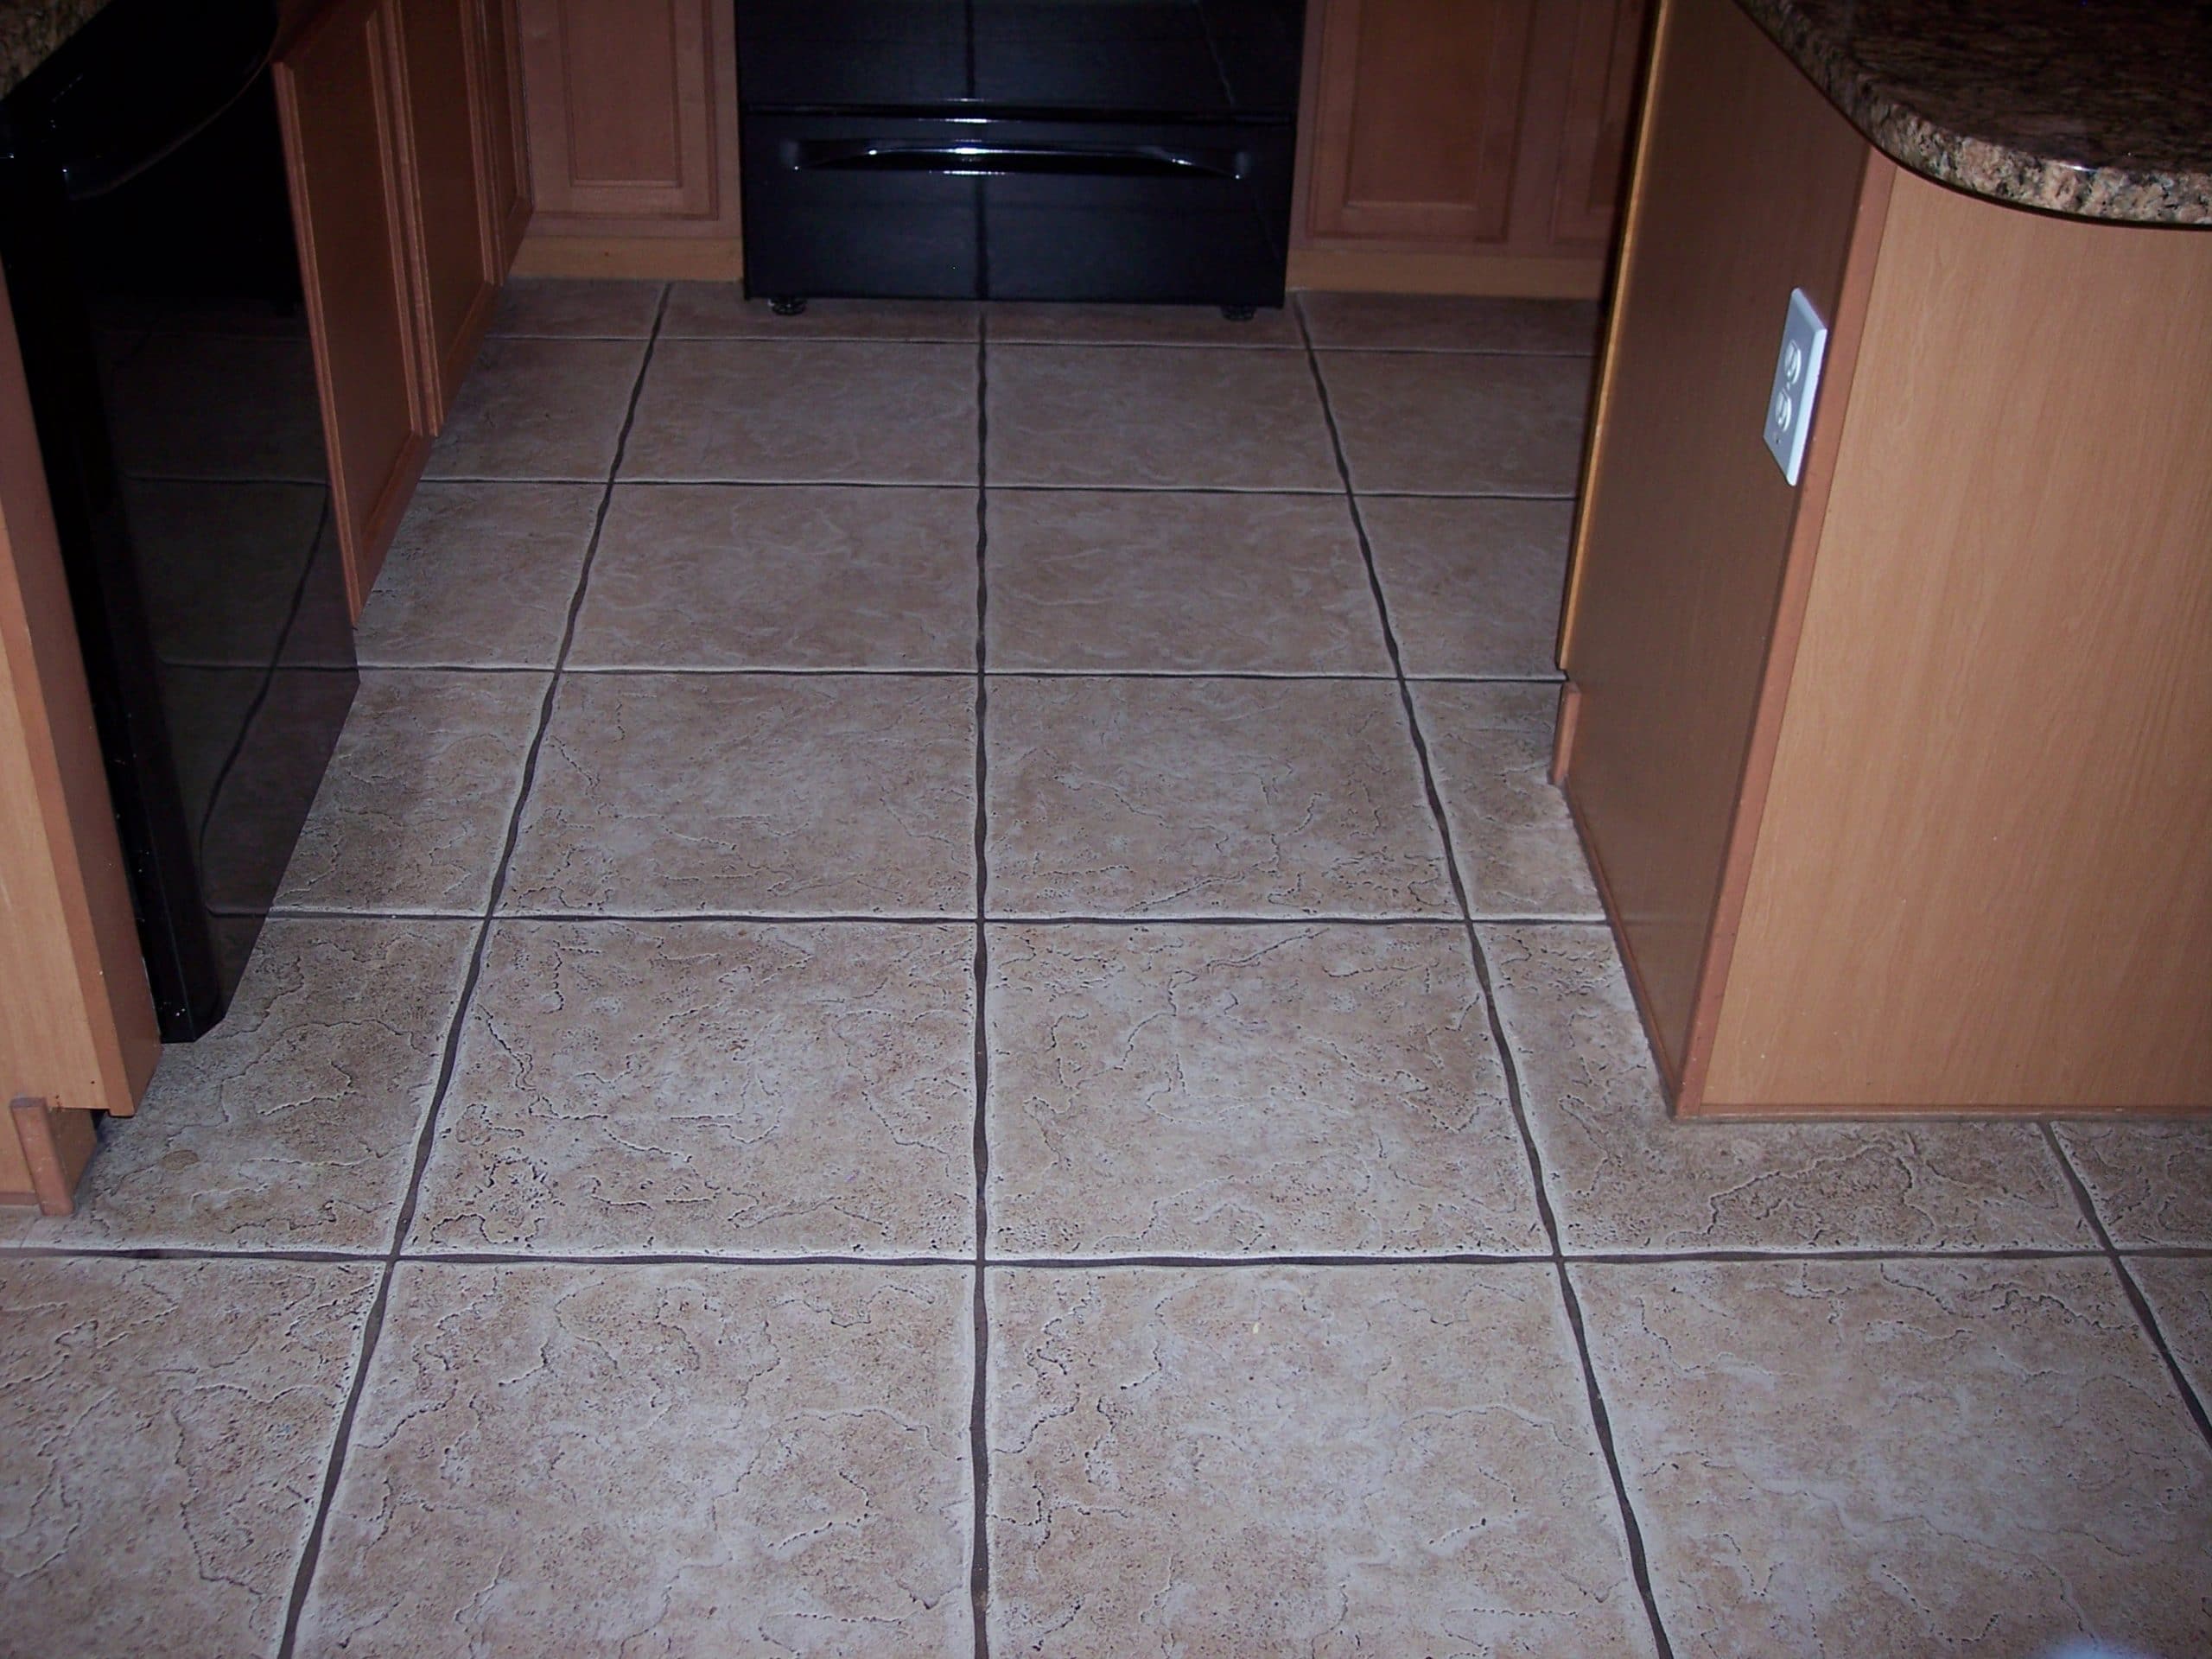 Expert Affordable Ceramic Tile Cleaning Desert Tile And Grout Care